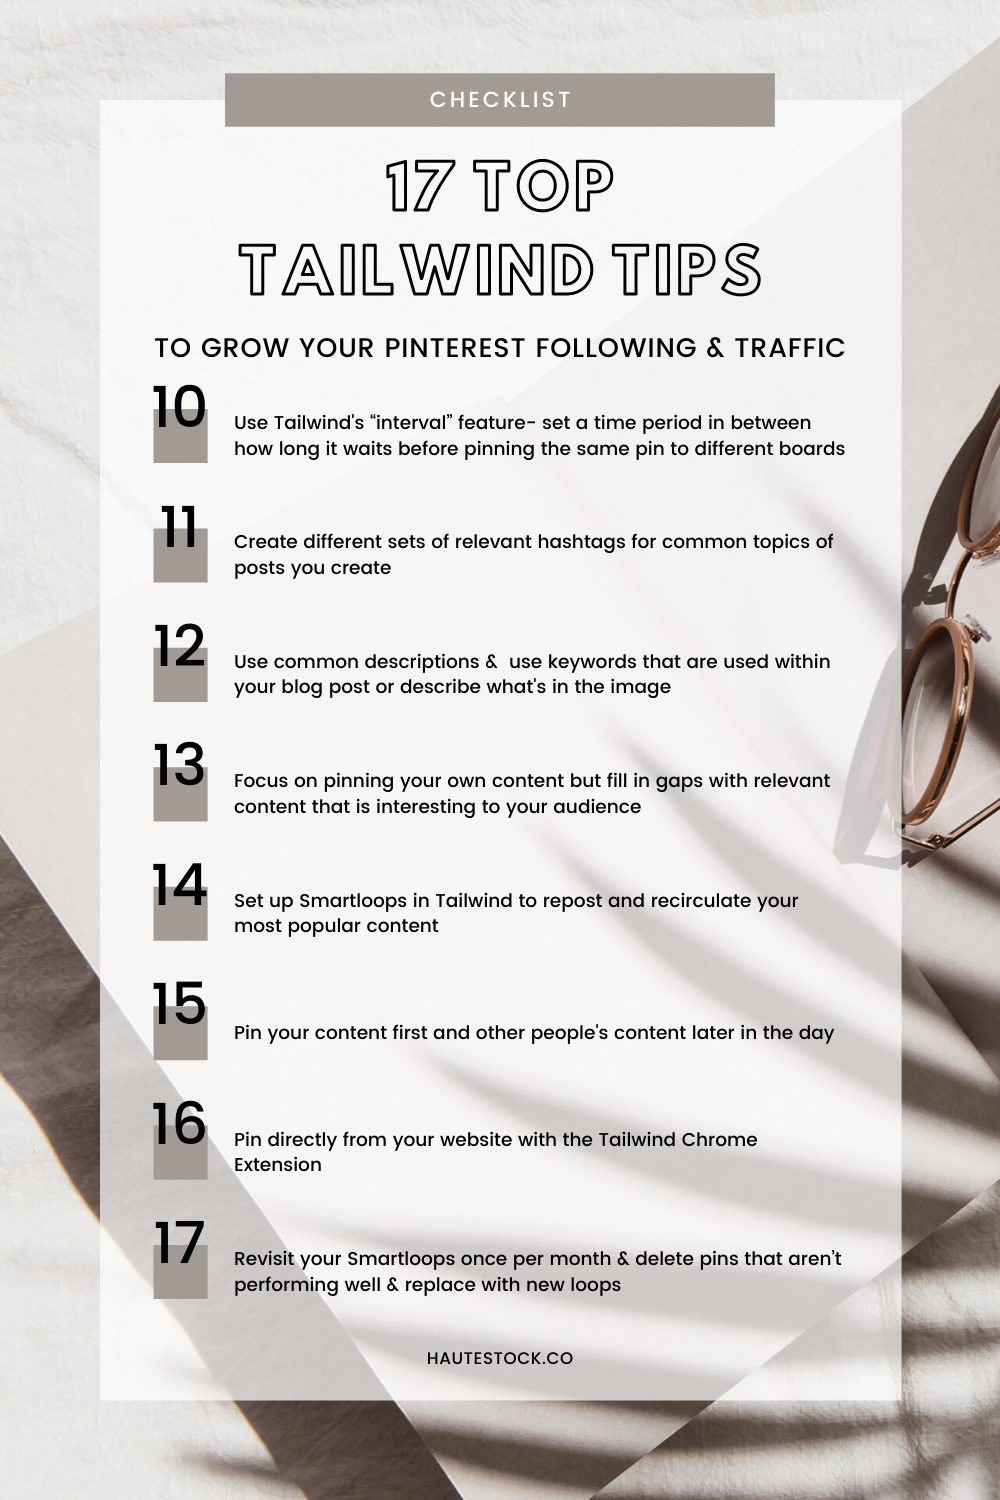 17 top Tailwind Tips to help grow your business' Pinterest following and traffic for female entrepreneurs!